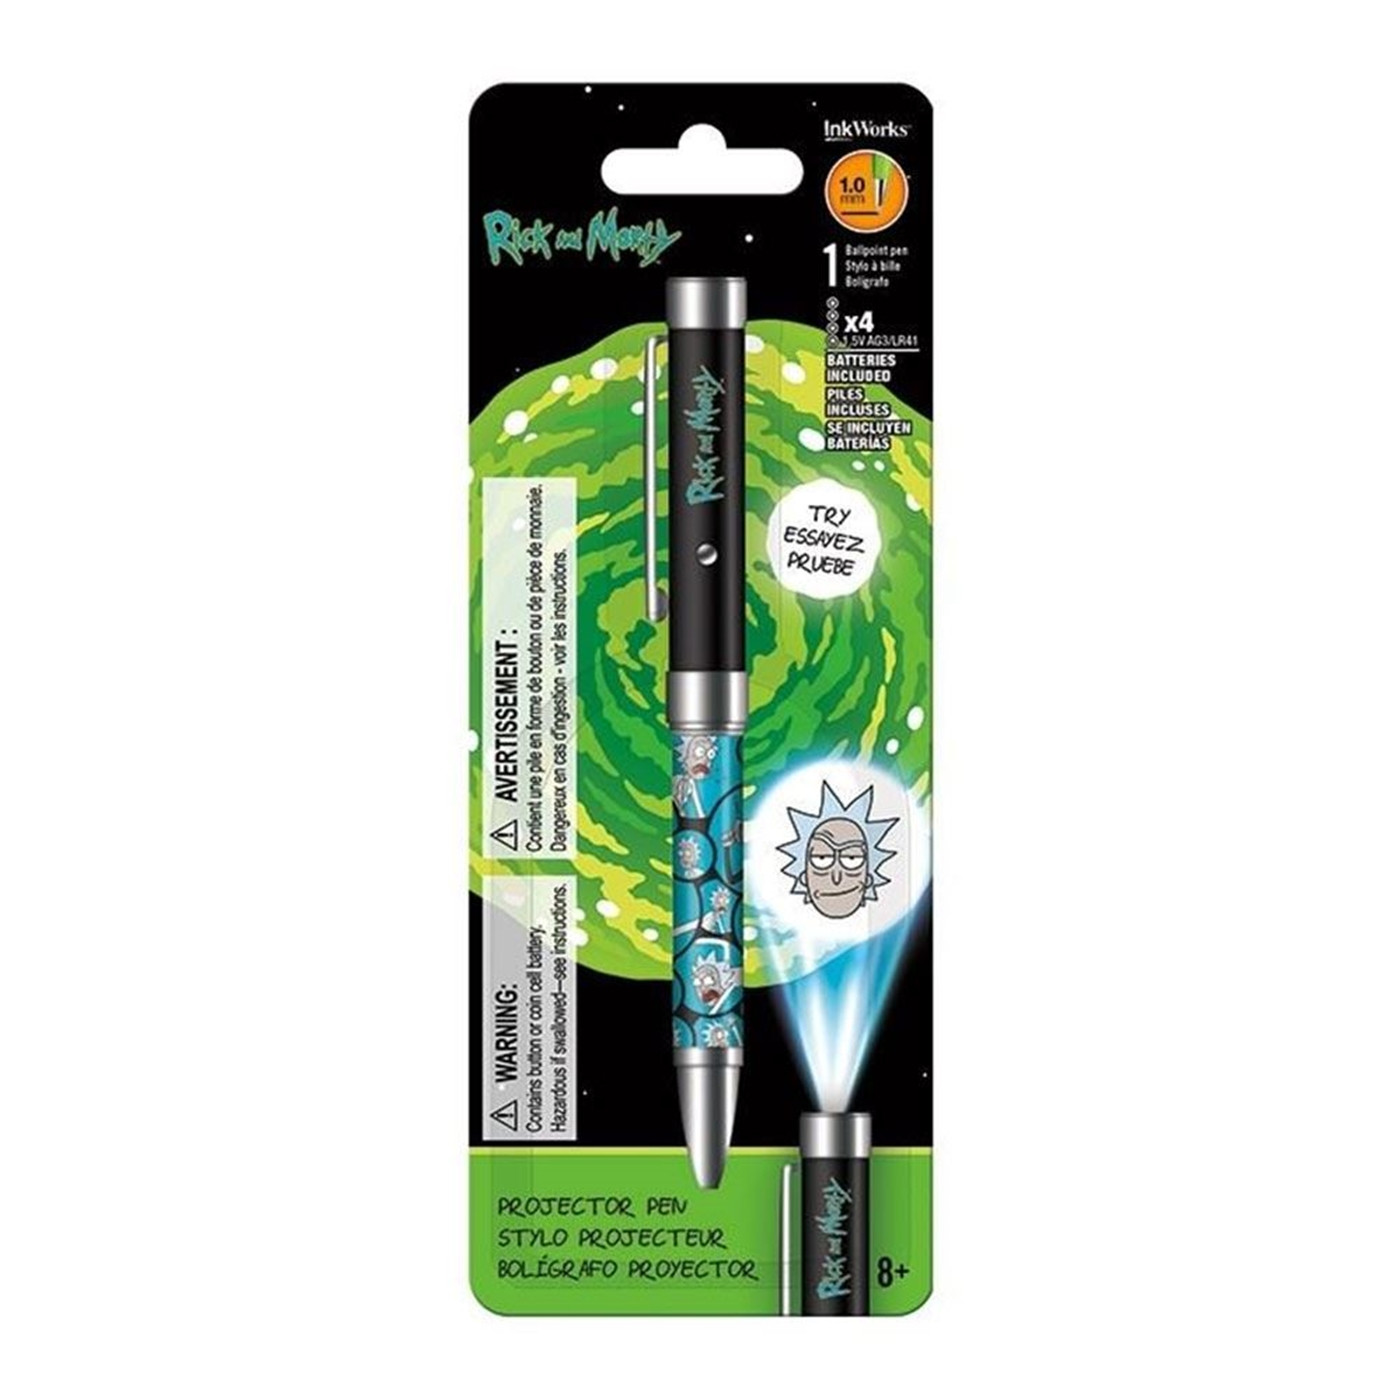 Rick and Morty Projector Pen